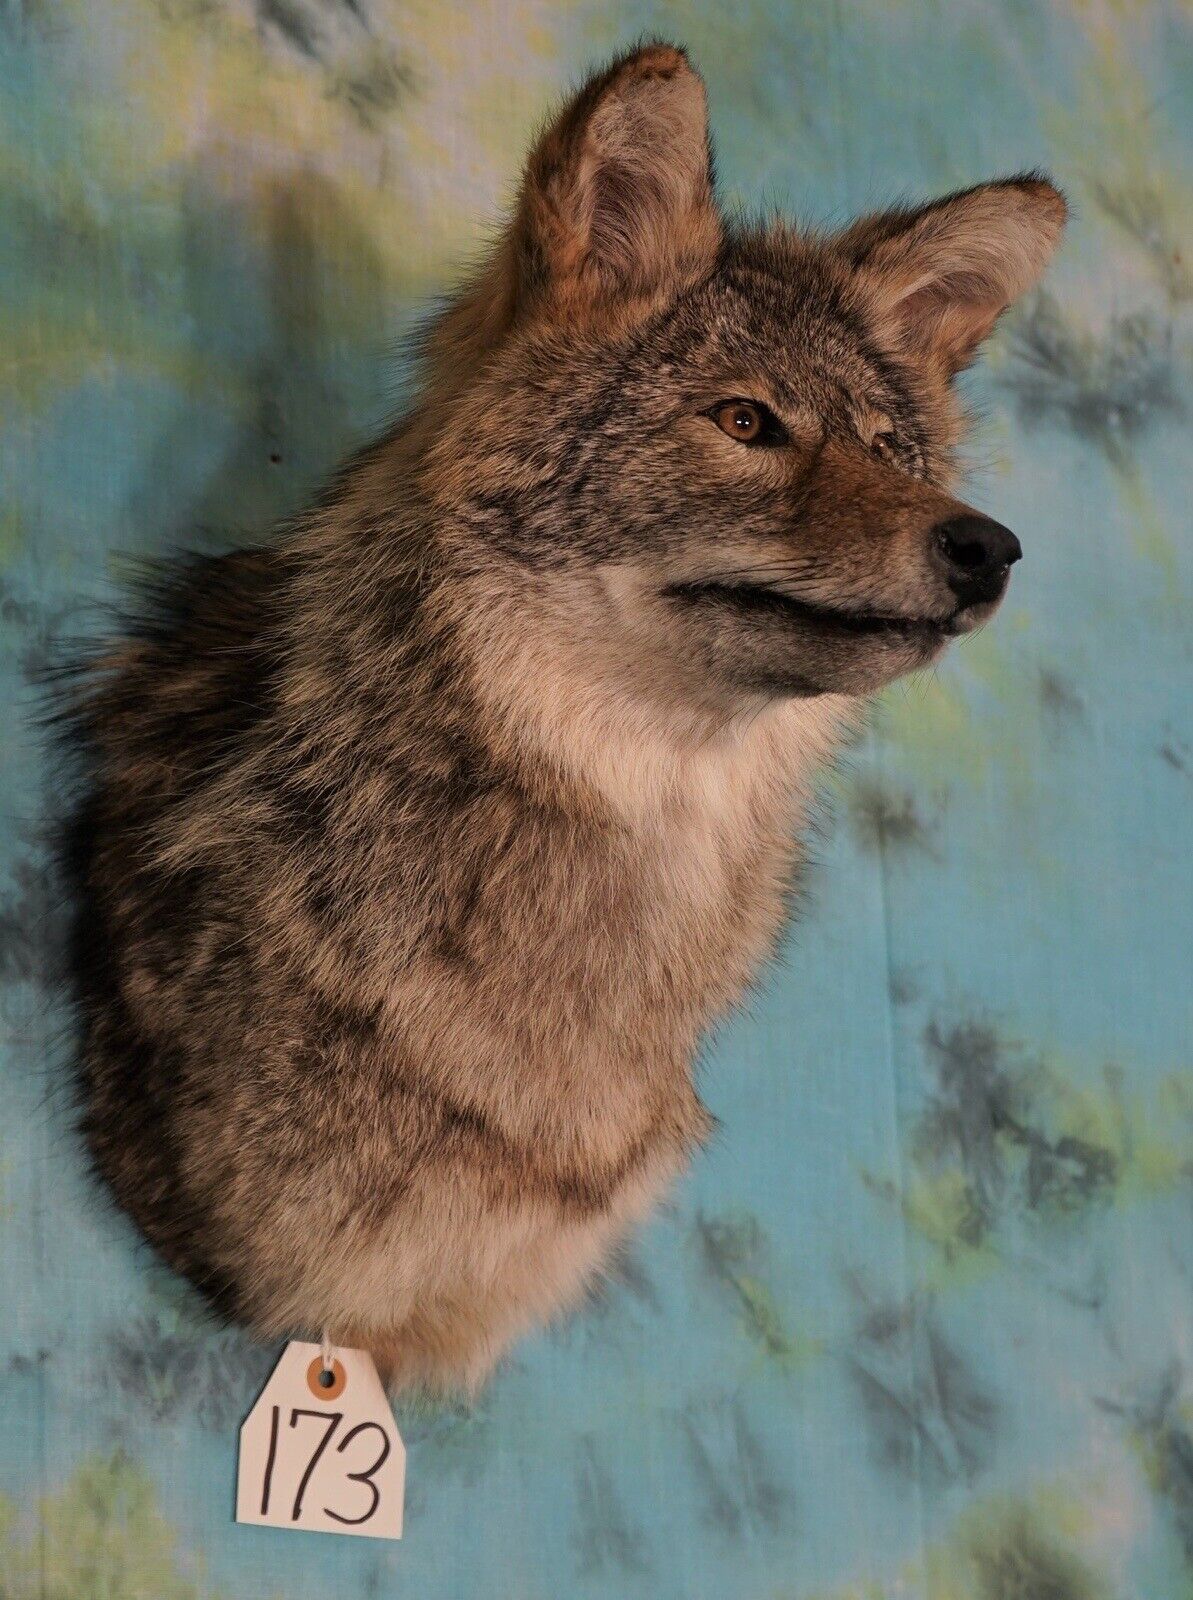 Coyote Shoulder Mount Taxidermy Man Cave Cabin Camp Den Home Office Decor NEW!